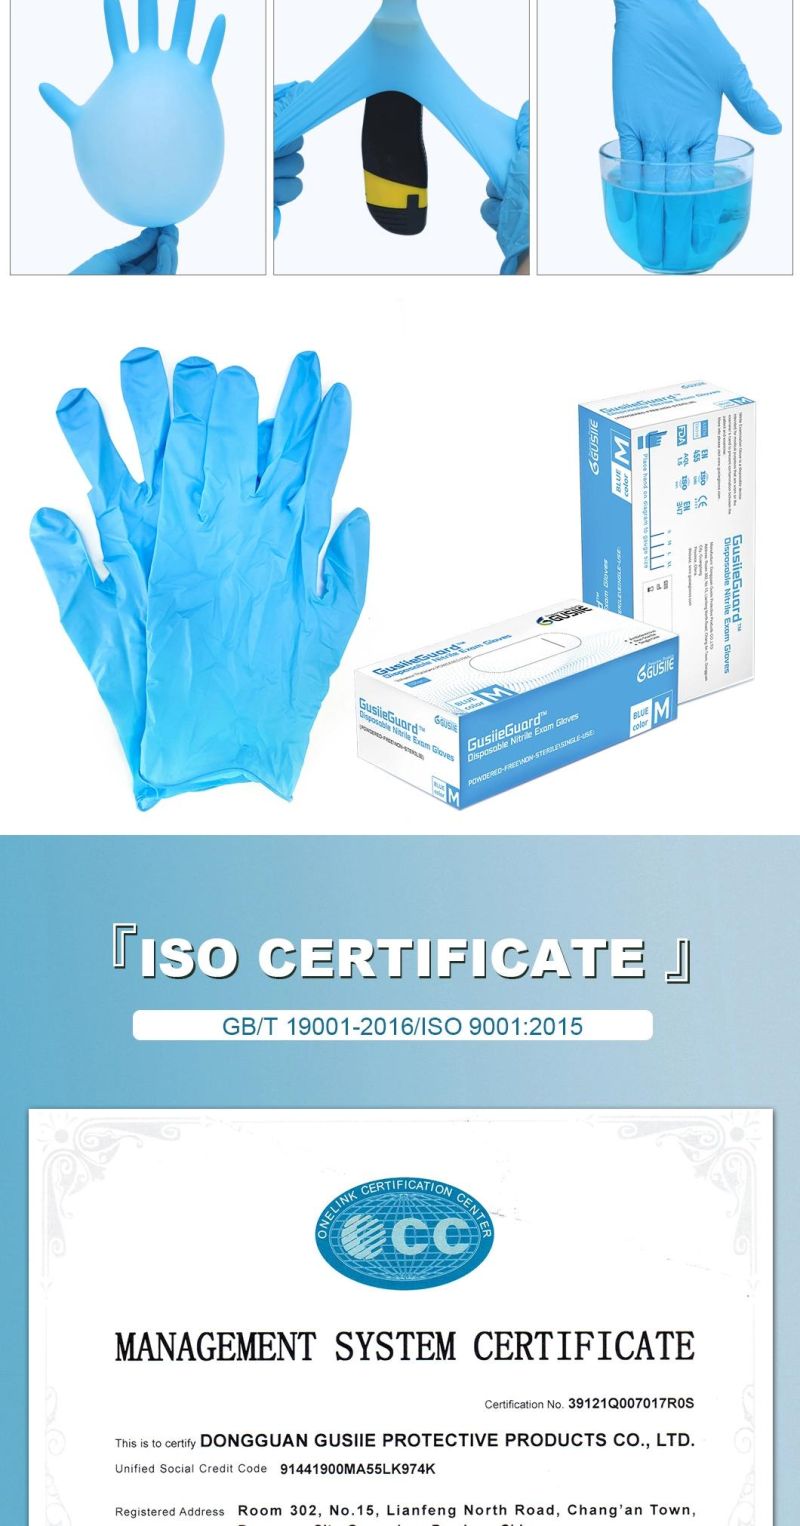 Gusiie Disposable Medical Examation Powder-Free Nitrile Gloves